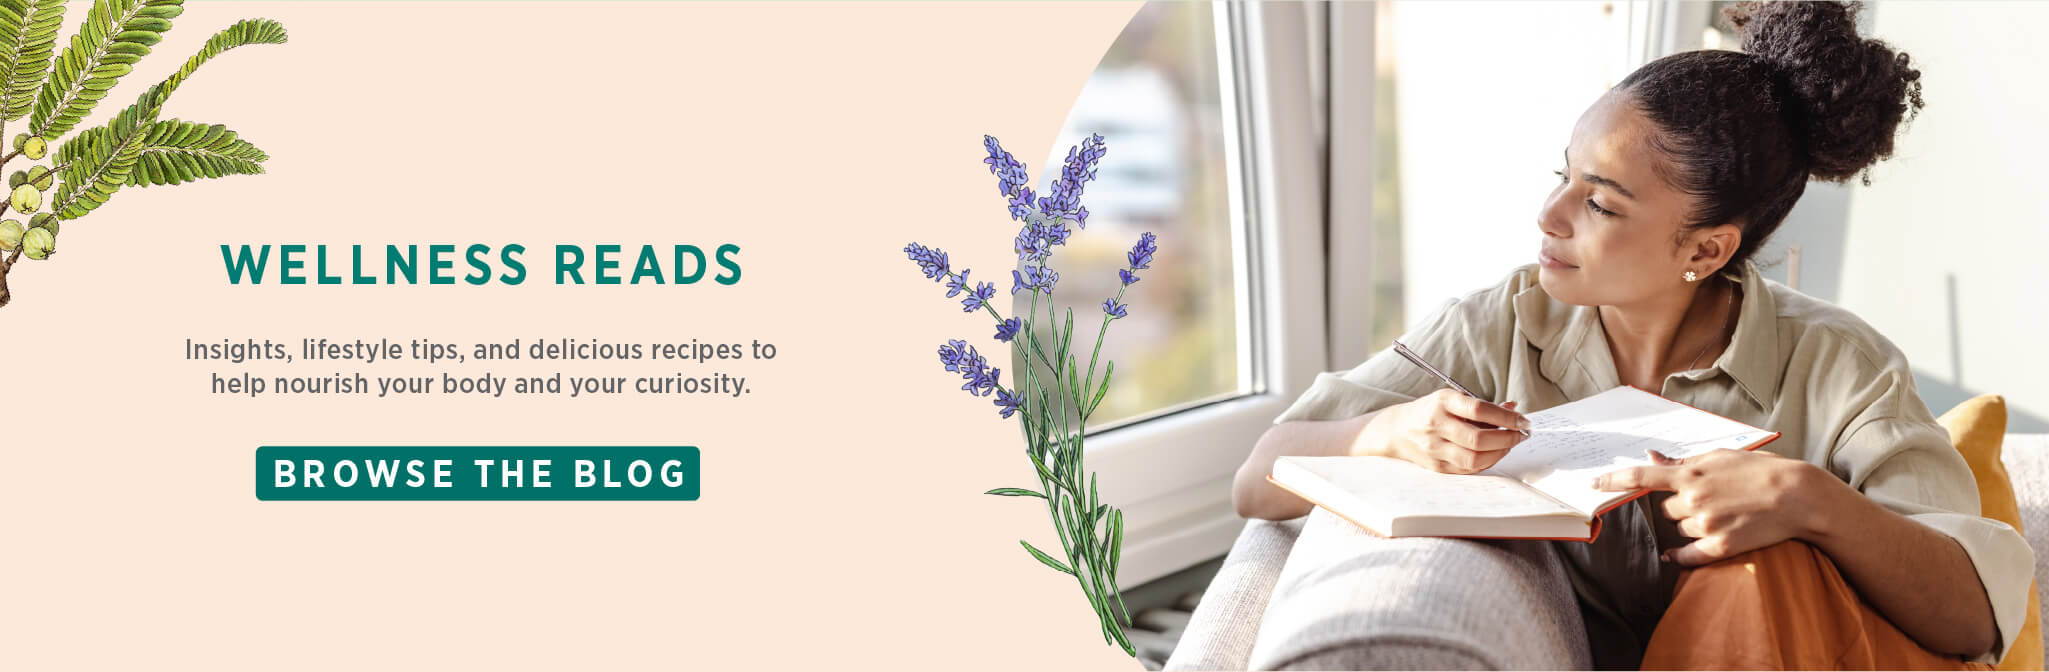 Wellness Reads: Insights, lifestyle tips, and delicious recipes to help nourish your body and your curiosity. Browse the blog.